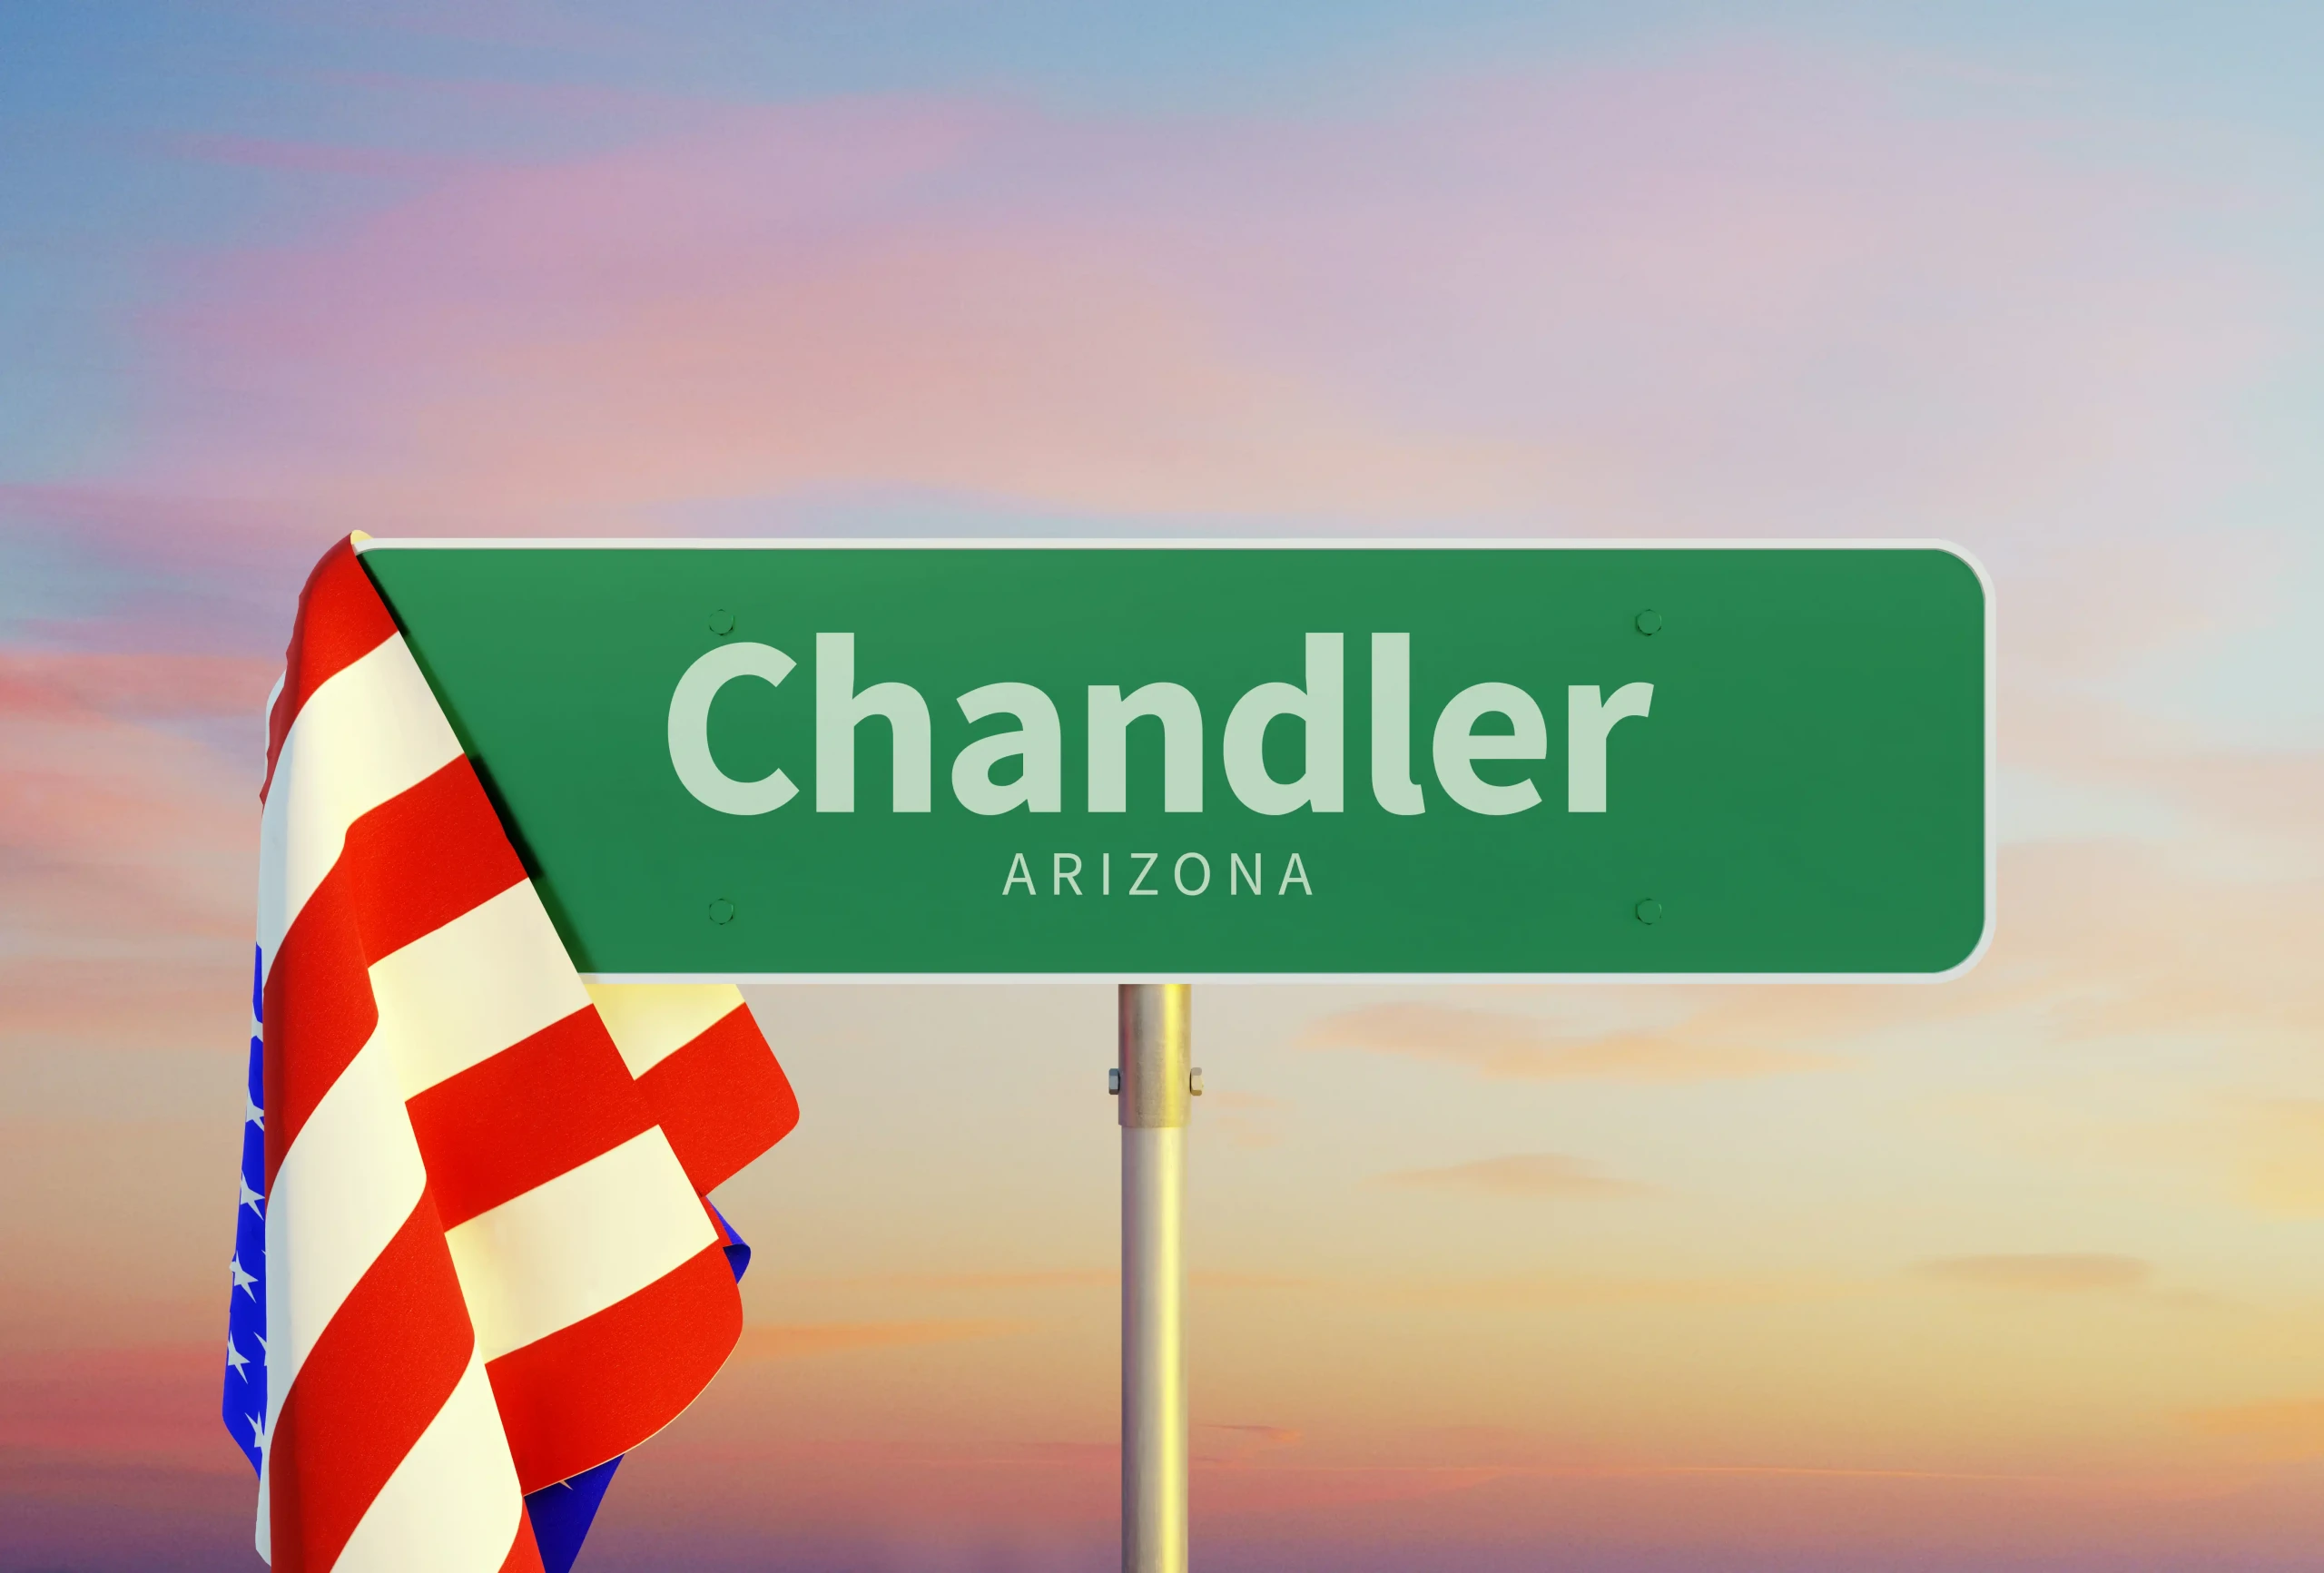 Chandler Travel Guide: Signage on road